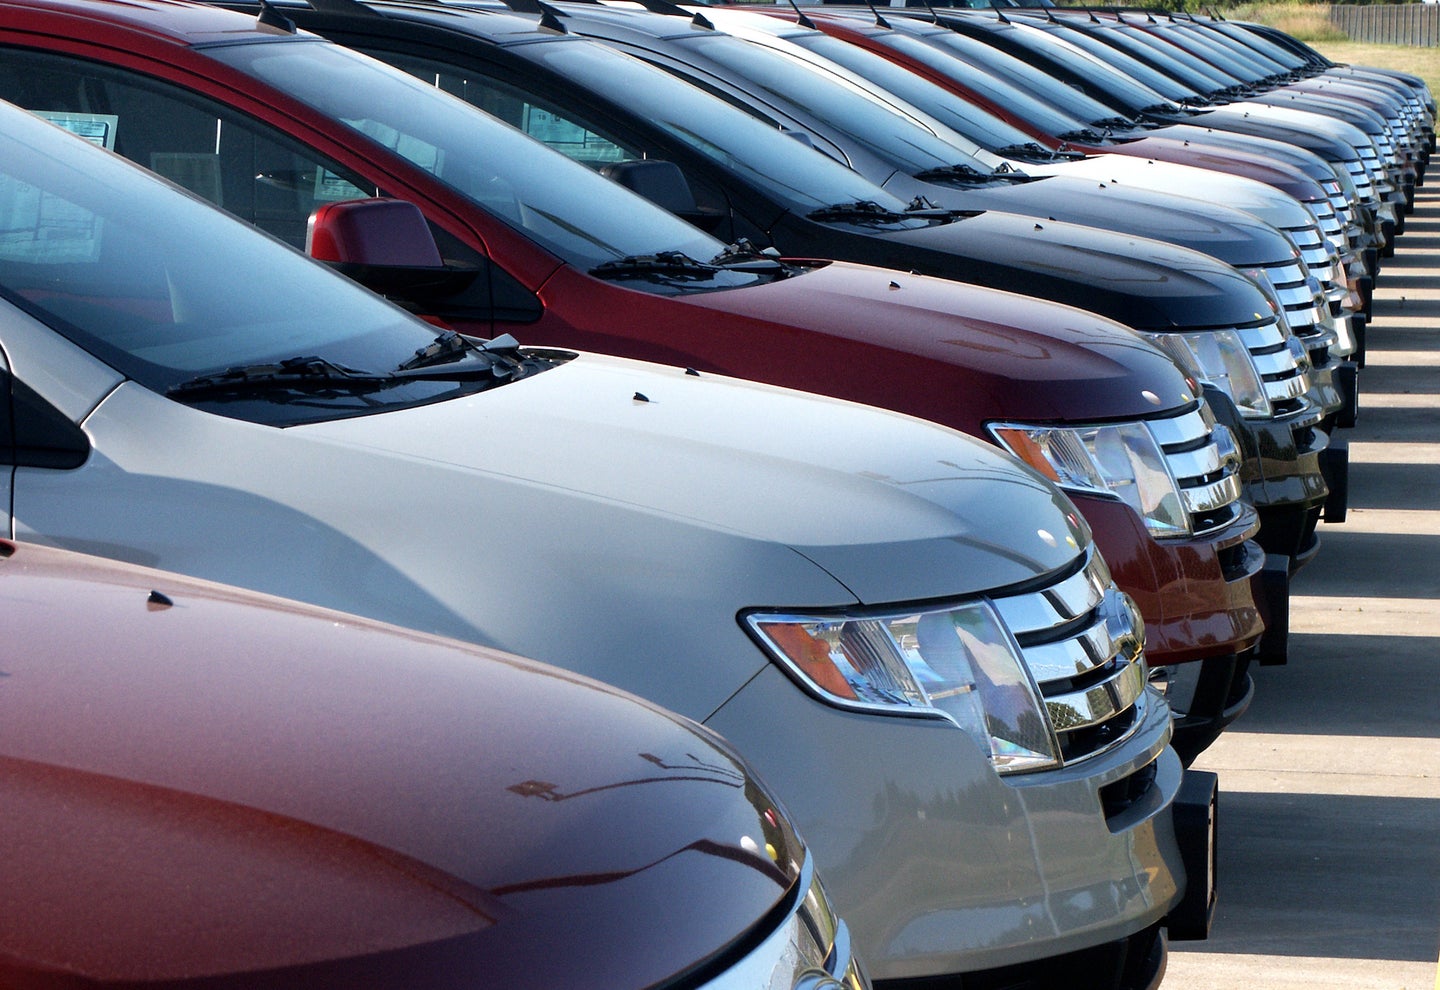 The Best Used Car Warranty Companies: Keep Your Well-Used Vehicle Covered